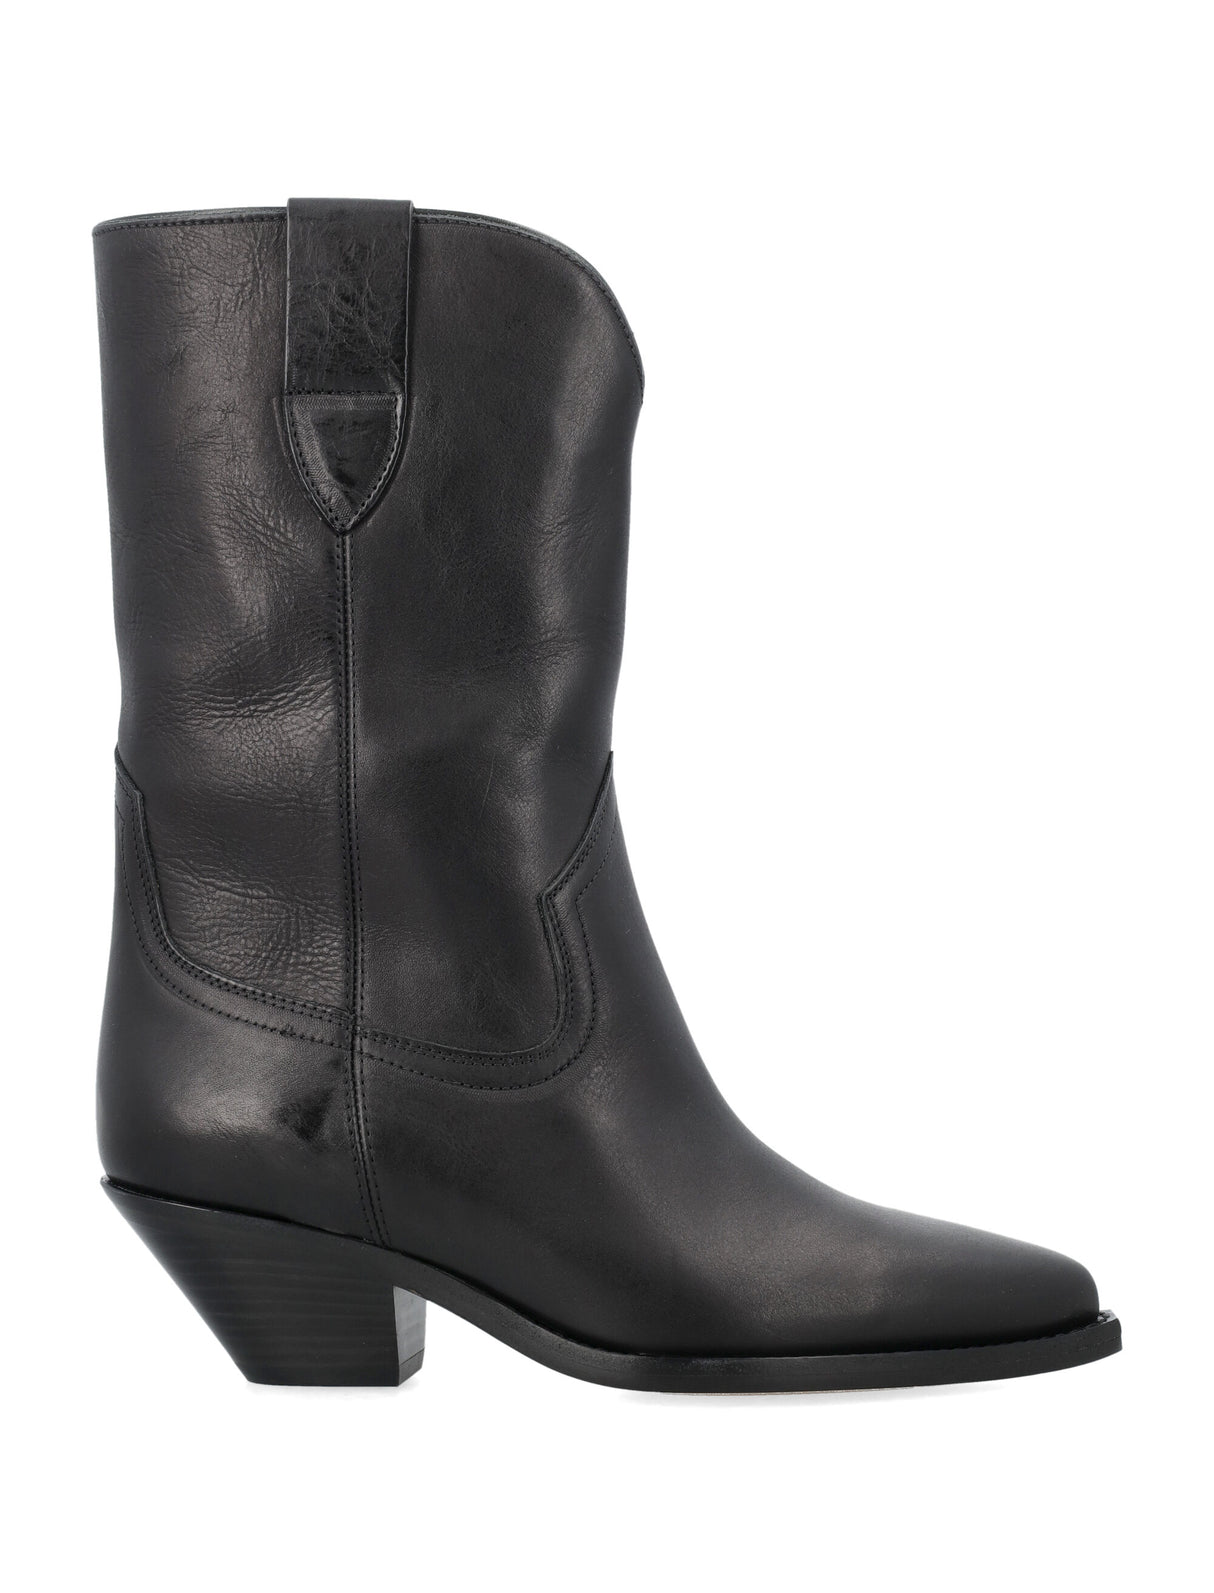 ISABEL MARANT DAHOPE LEATHER COWBOY BOOTS - Pointed toe, 5cm heel height